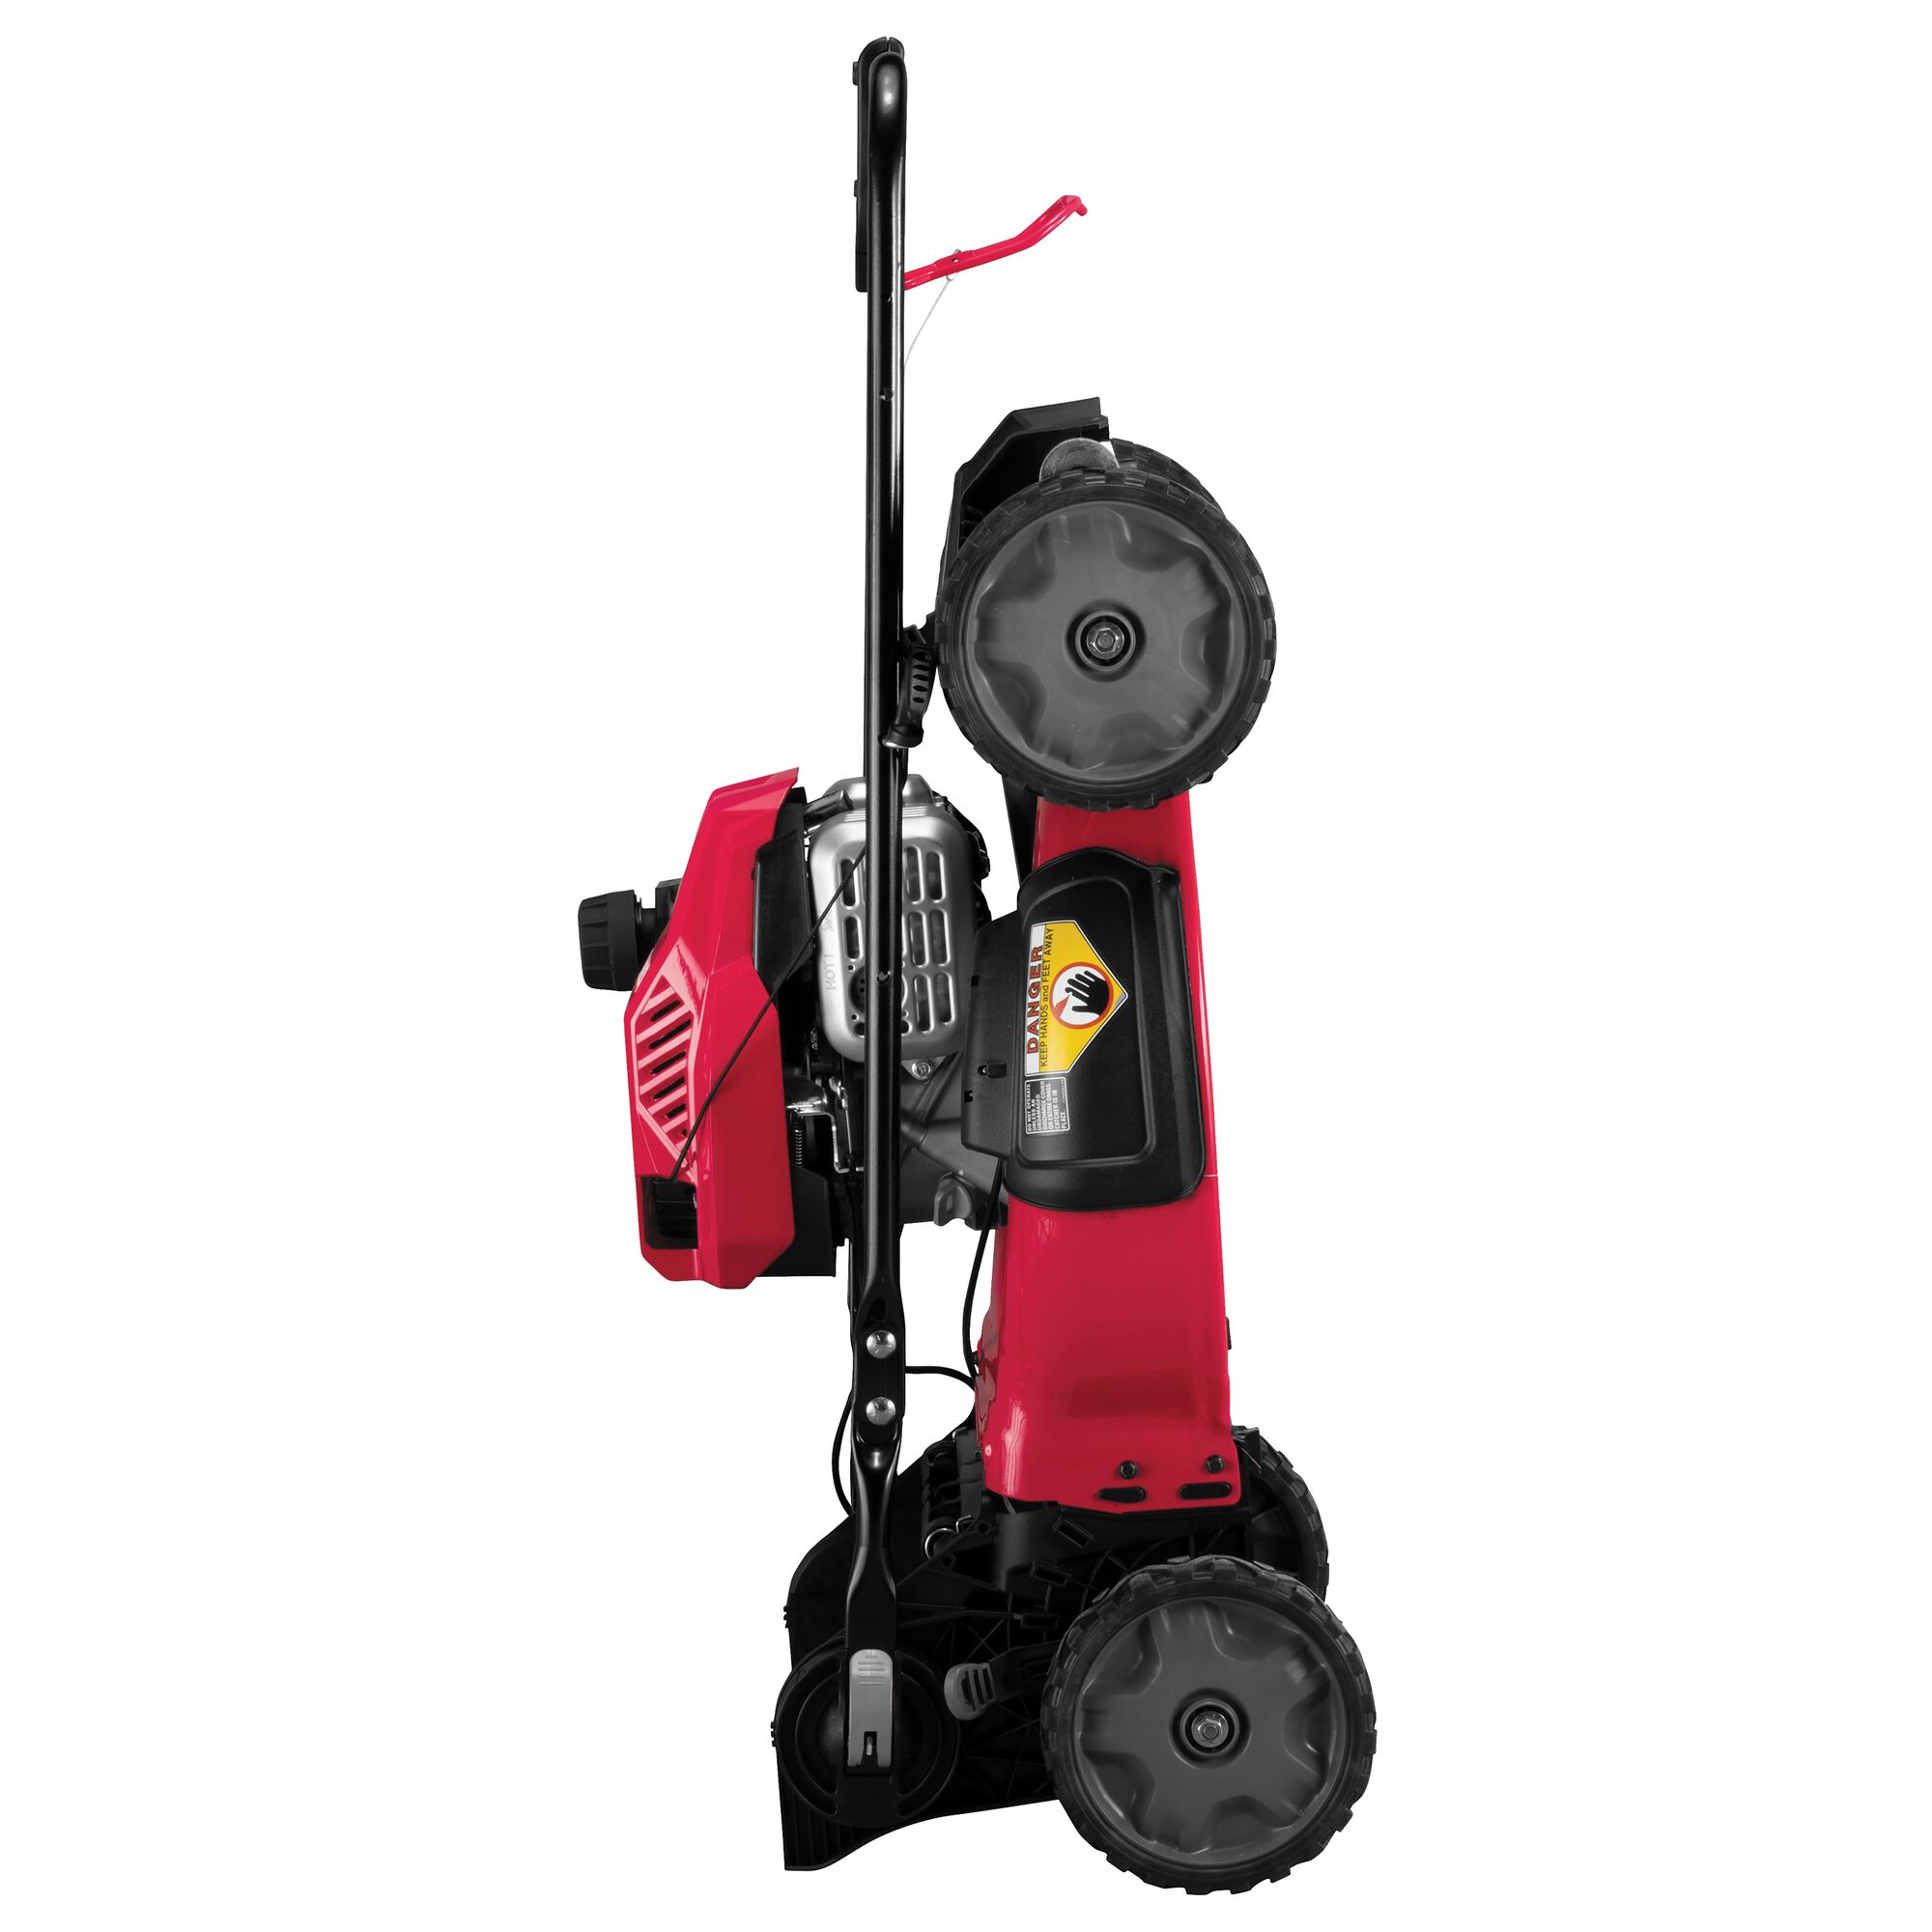 Profile of 21 inch 149 c c front wheel drive self propelled lawn mower.